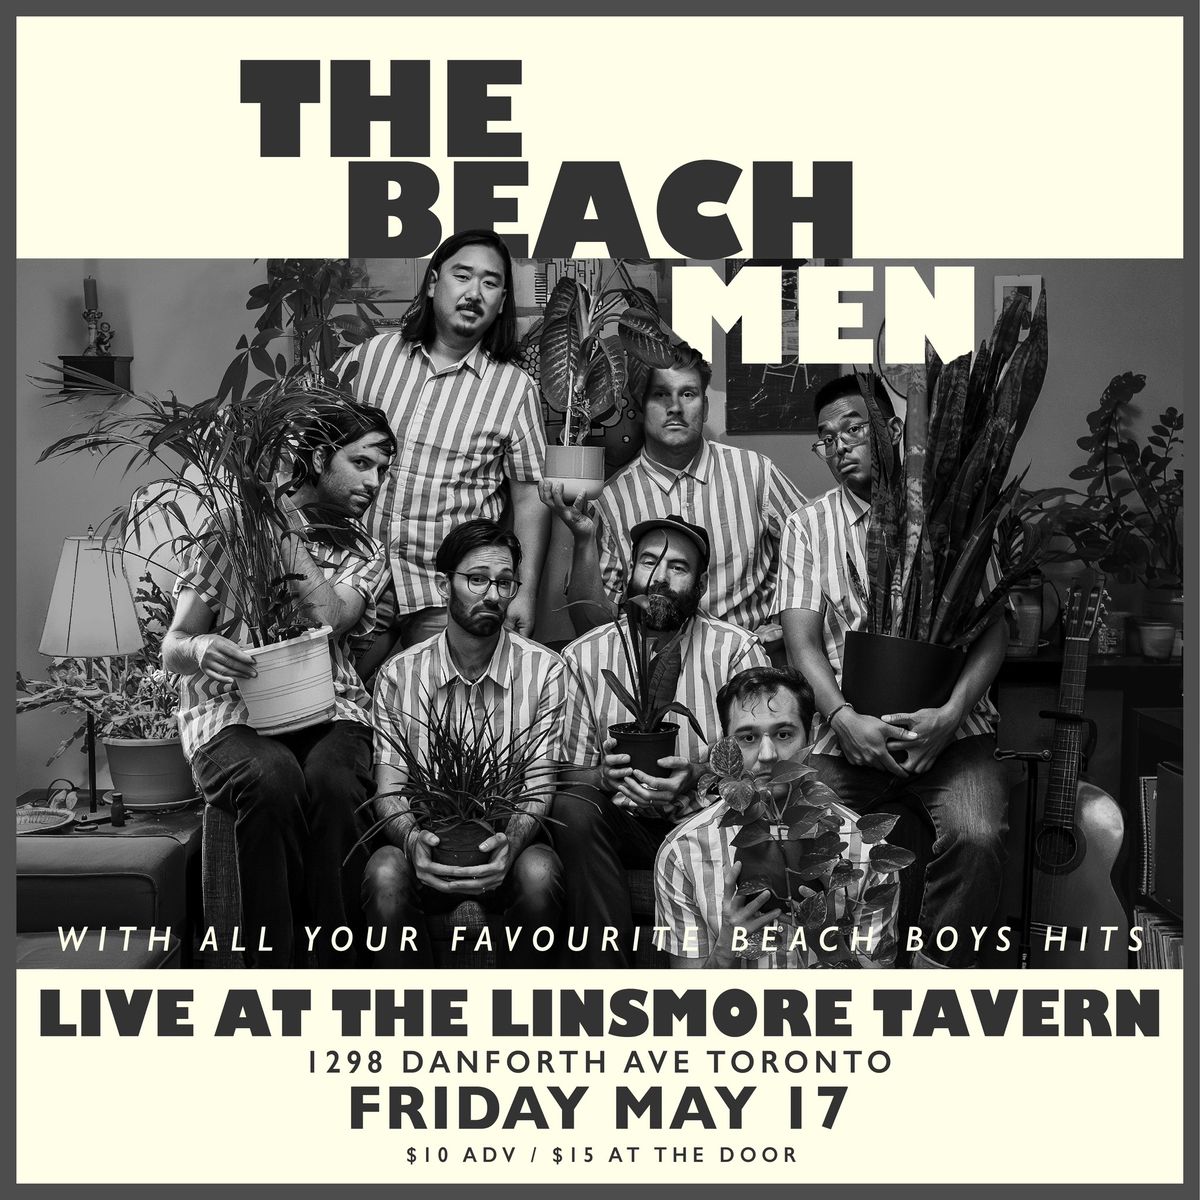 The Beachmen \u2013 Tribute to The Beach Boys Live at the Linsmore Tavern!